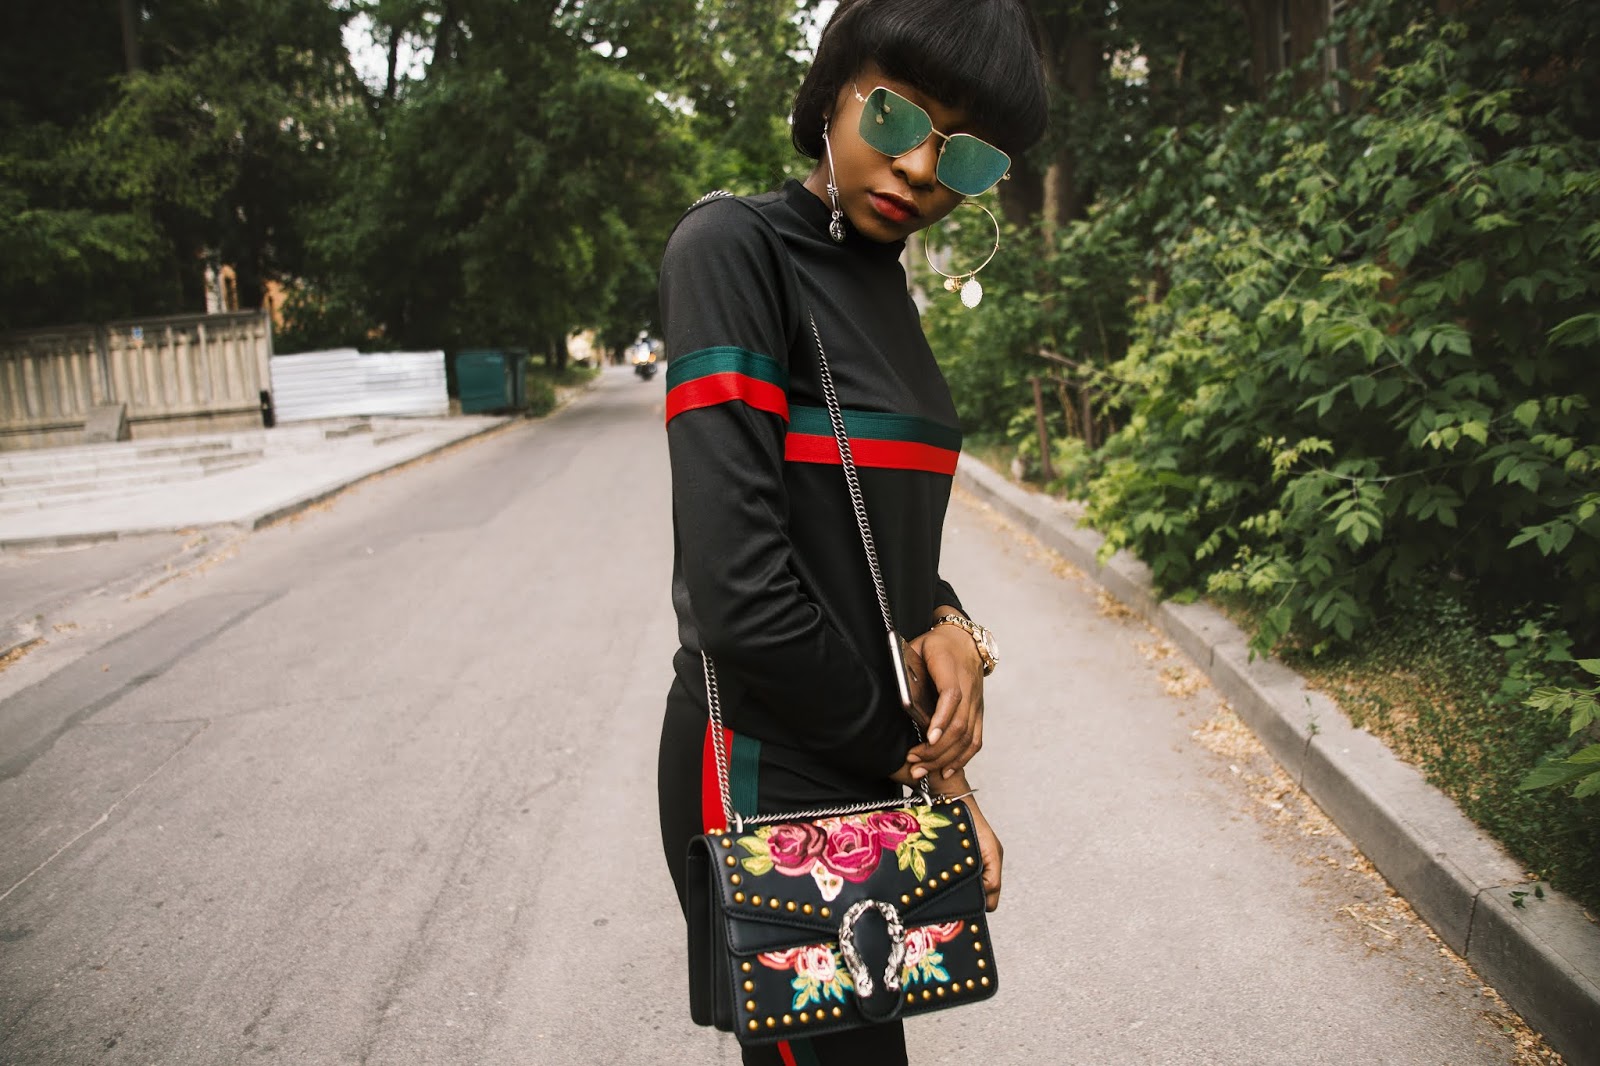  Embroidered Cross Body Bags to Purchase Now : Jessica Buurman 